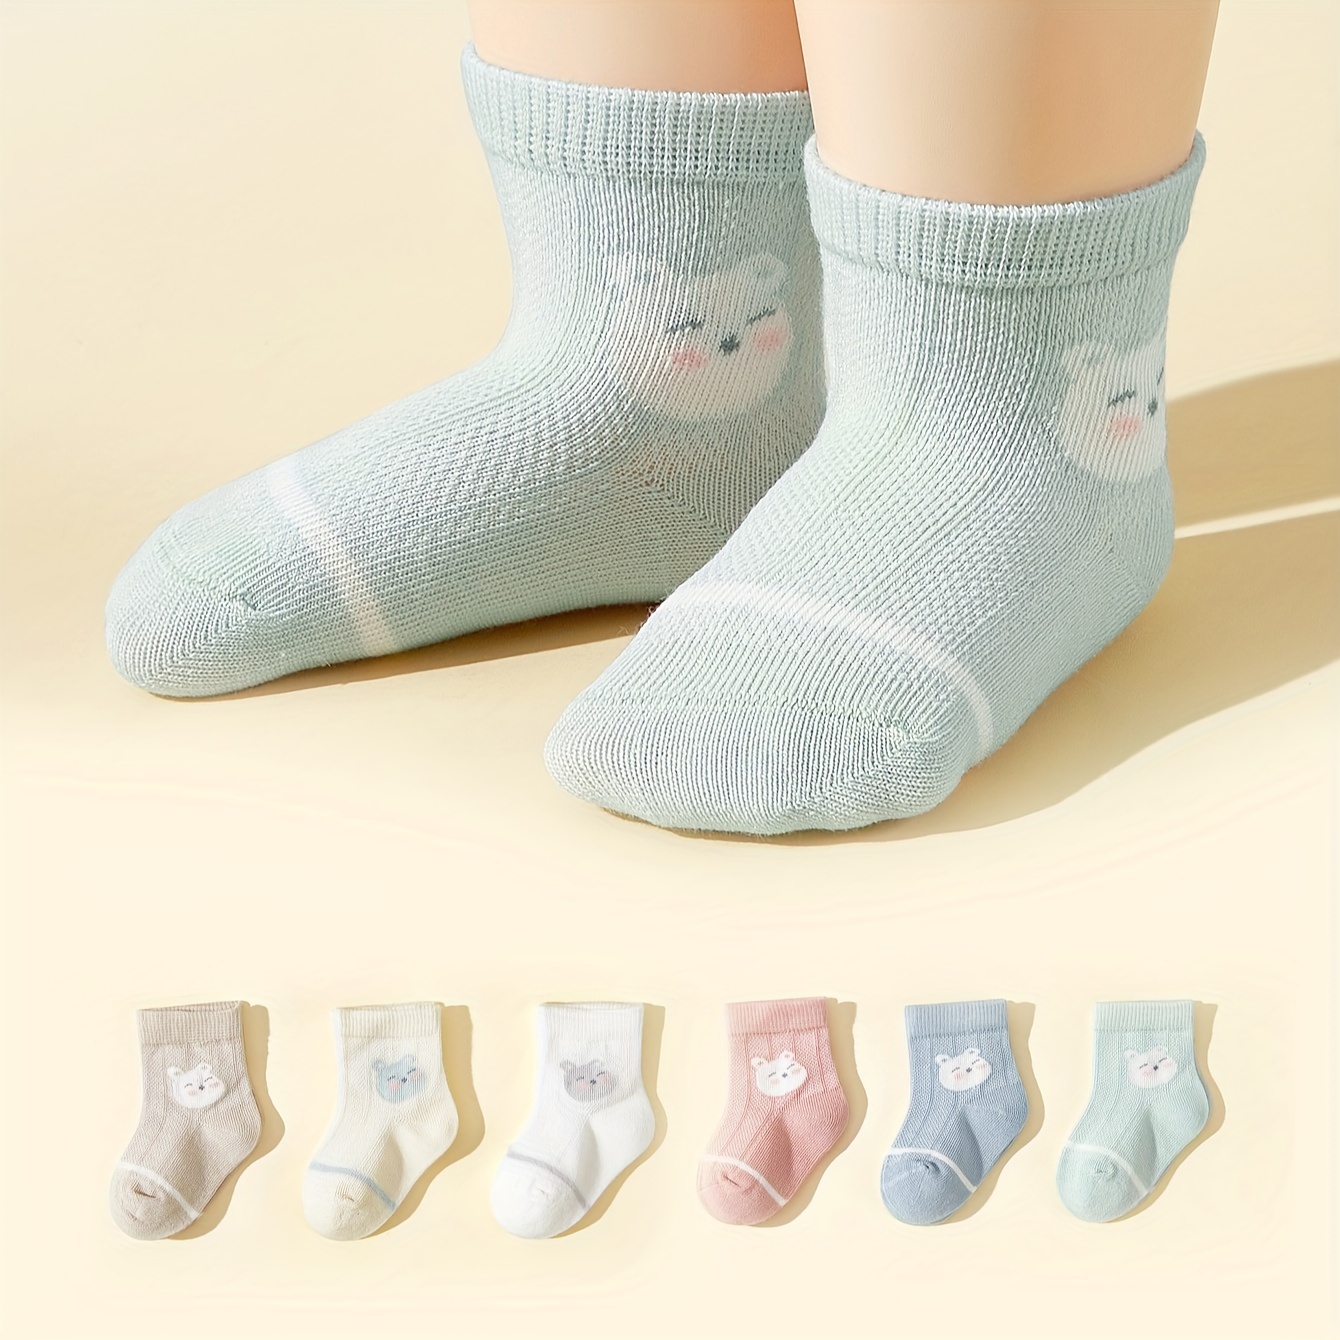 

6 Pairs Of Baby Girl's Cotton Blend Adorable Animals Pattern Crew Socks, Comfy Breathable Casual Soft & Elastic Socks For Infant's Indoor Outdoor Activities